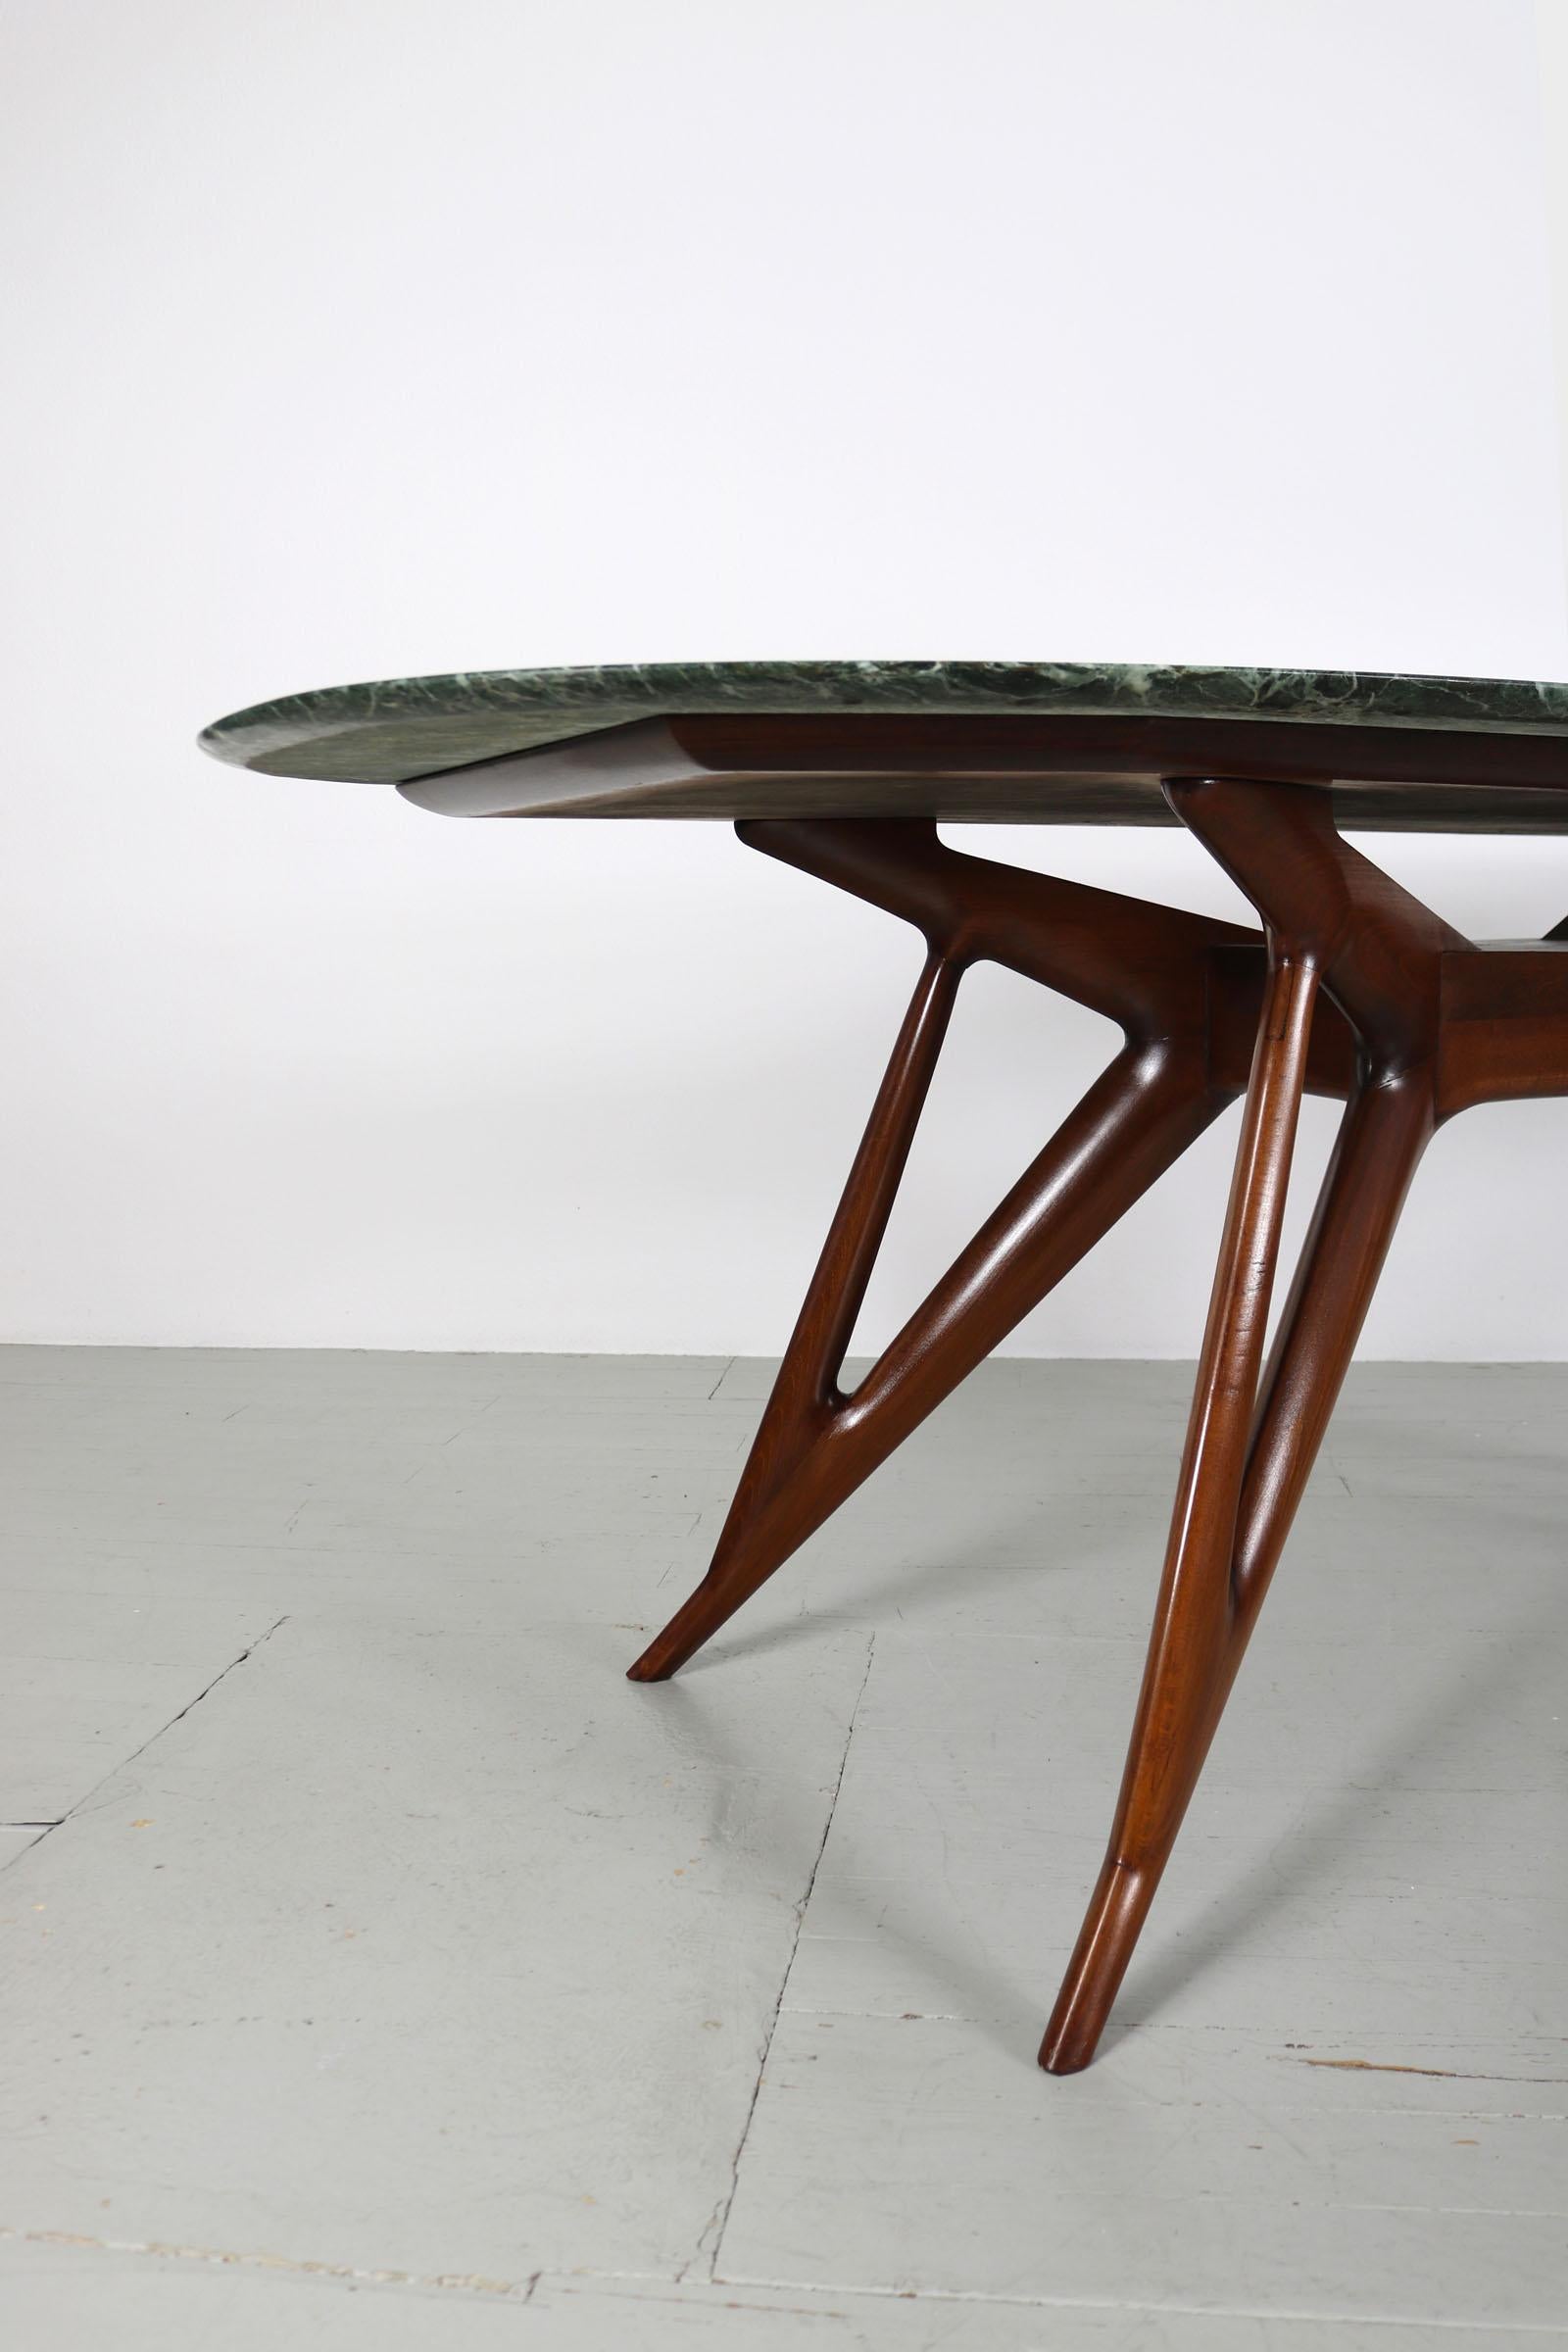 This Italian dining table was designed in the 1950s. The extravagant table frame is made of stained solid beechwood, and Alpi Verde marble was used as the material for the table top. Like most Italian dining tables, this table is slightly higher